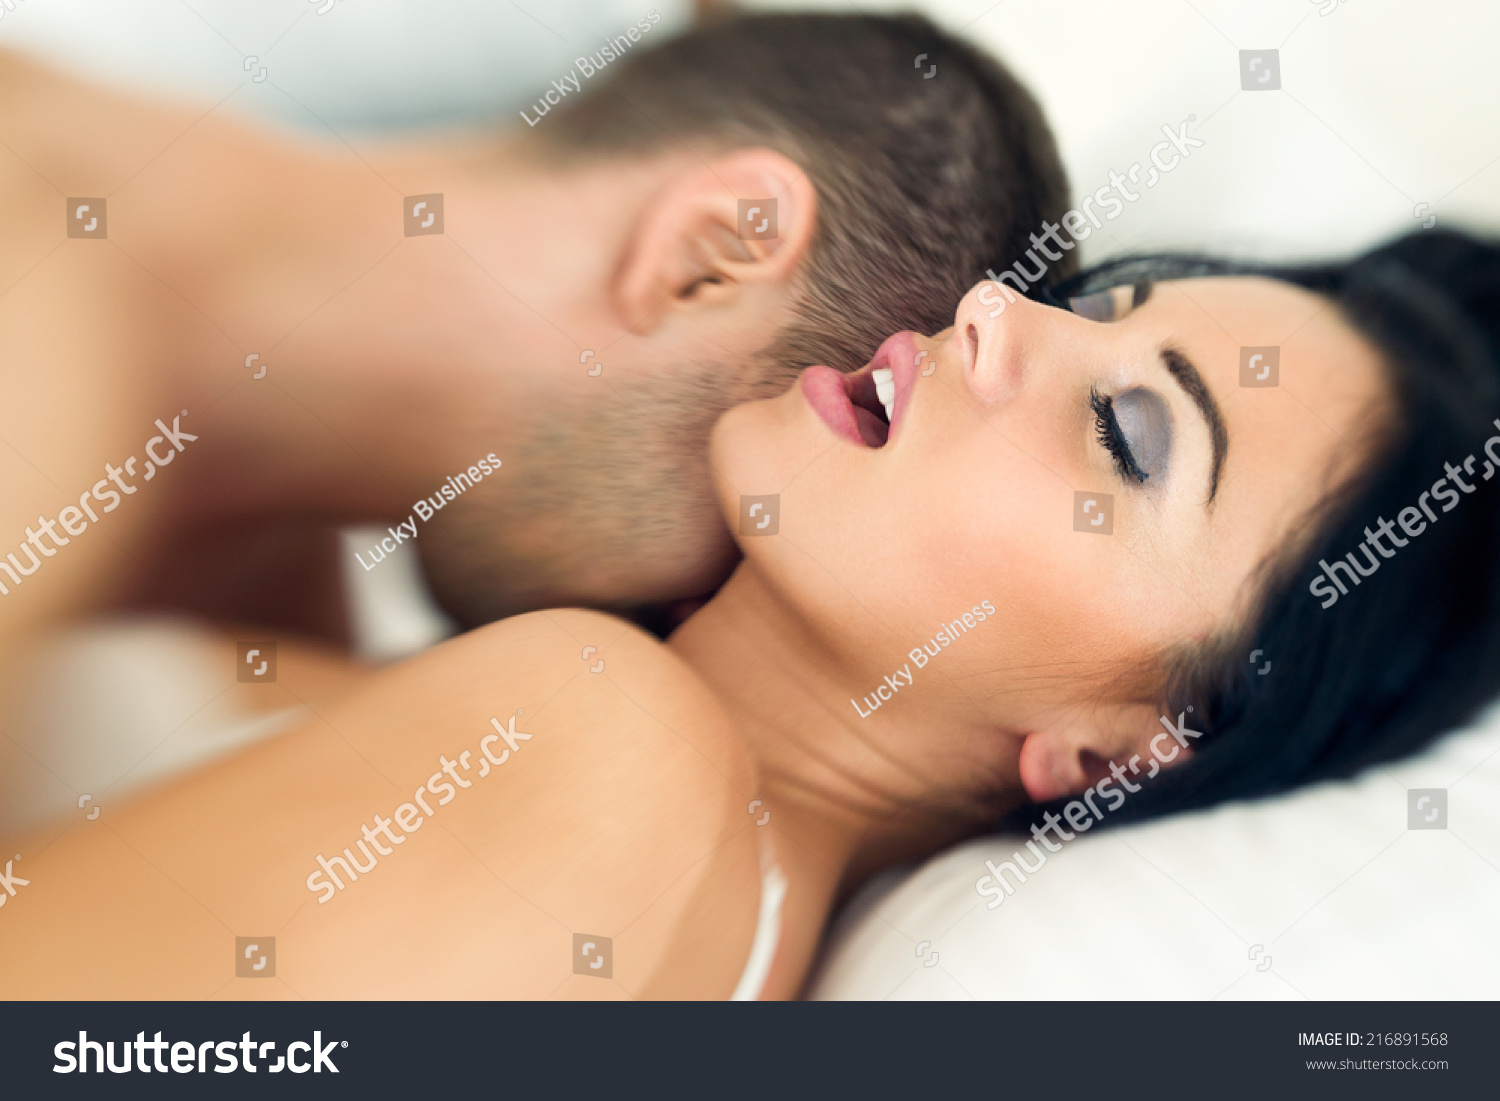 Women Aroused Facial Expression